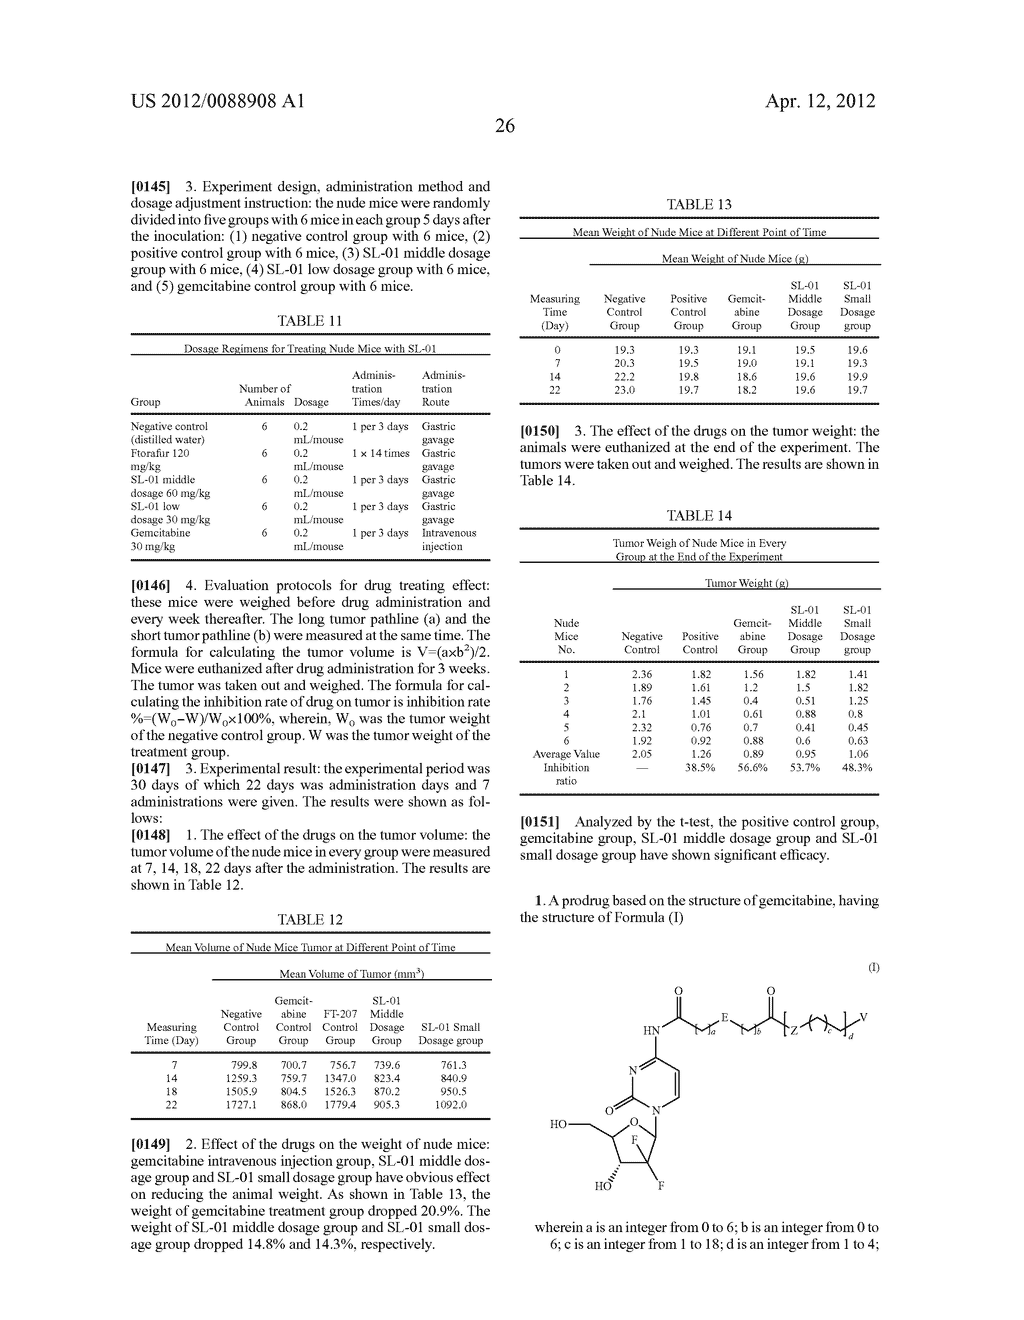 Prodrugs Based on Gemcitabine Structure and Synthetic Methods and     Applications Thereof - diagram, schematic, and image 27